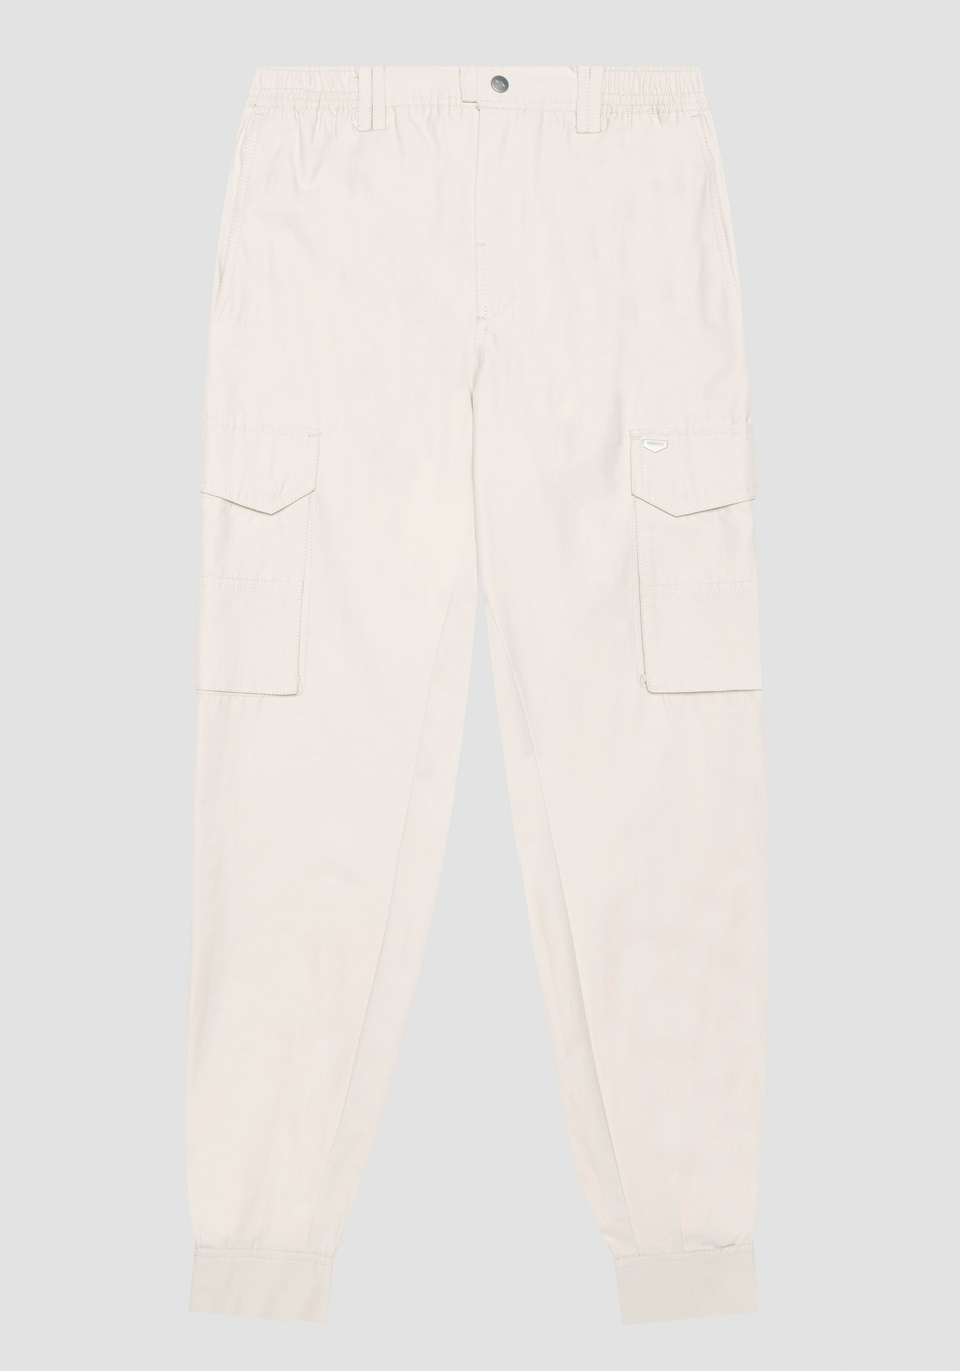 REGULAR FIT CARGO TROUSERS IN COTTON BLEND WITH ELASTICATED WAISTBAND AND VELCRO CLOSURE AT THE BOTTOM - Antony Morato Online Shop